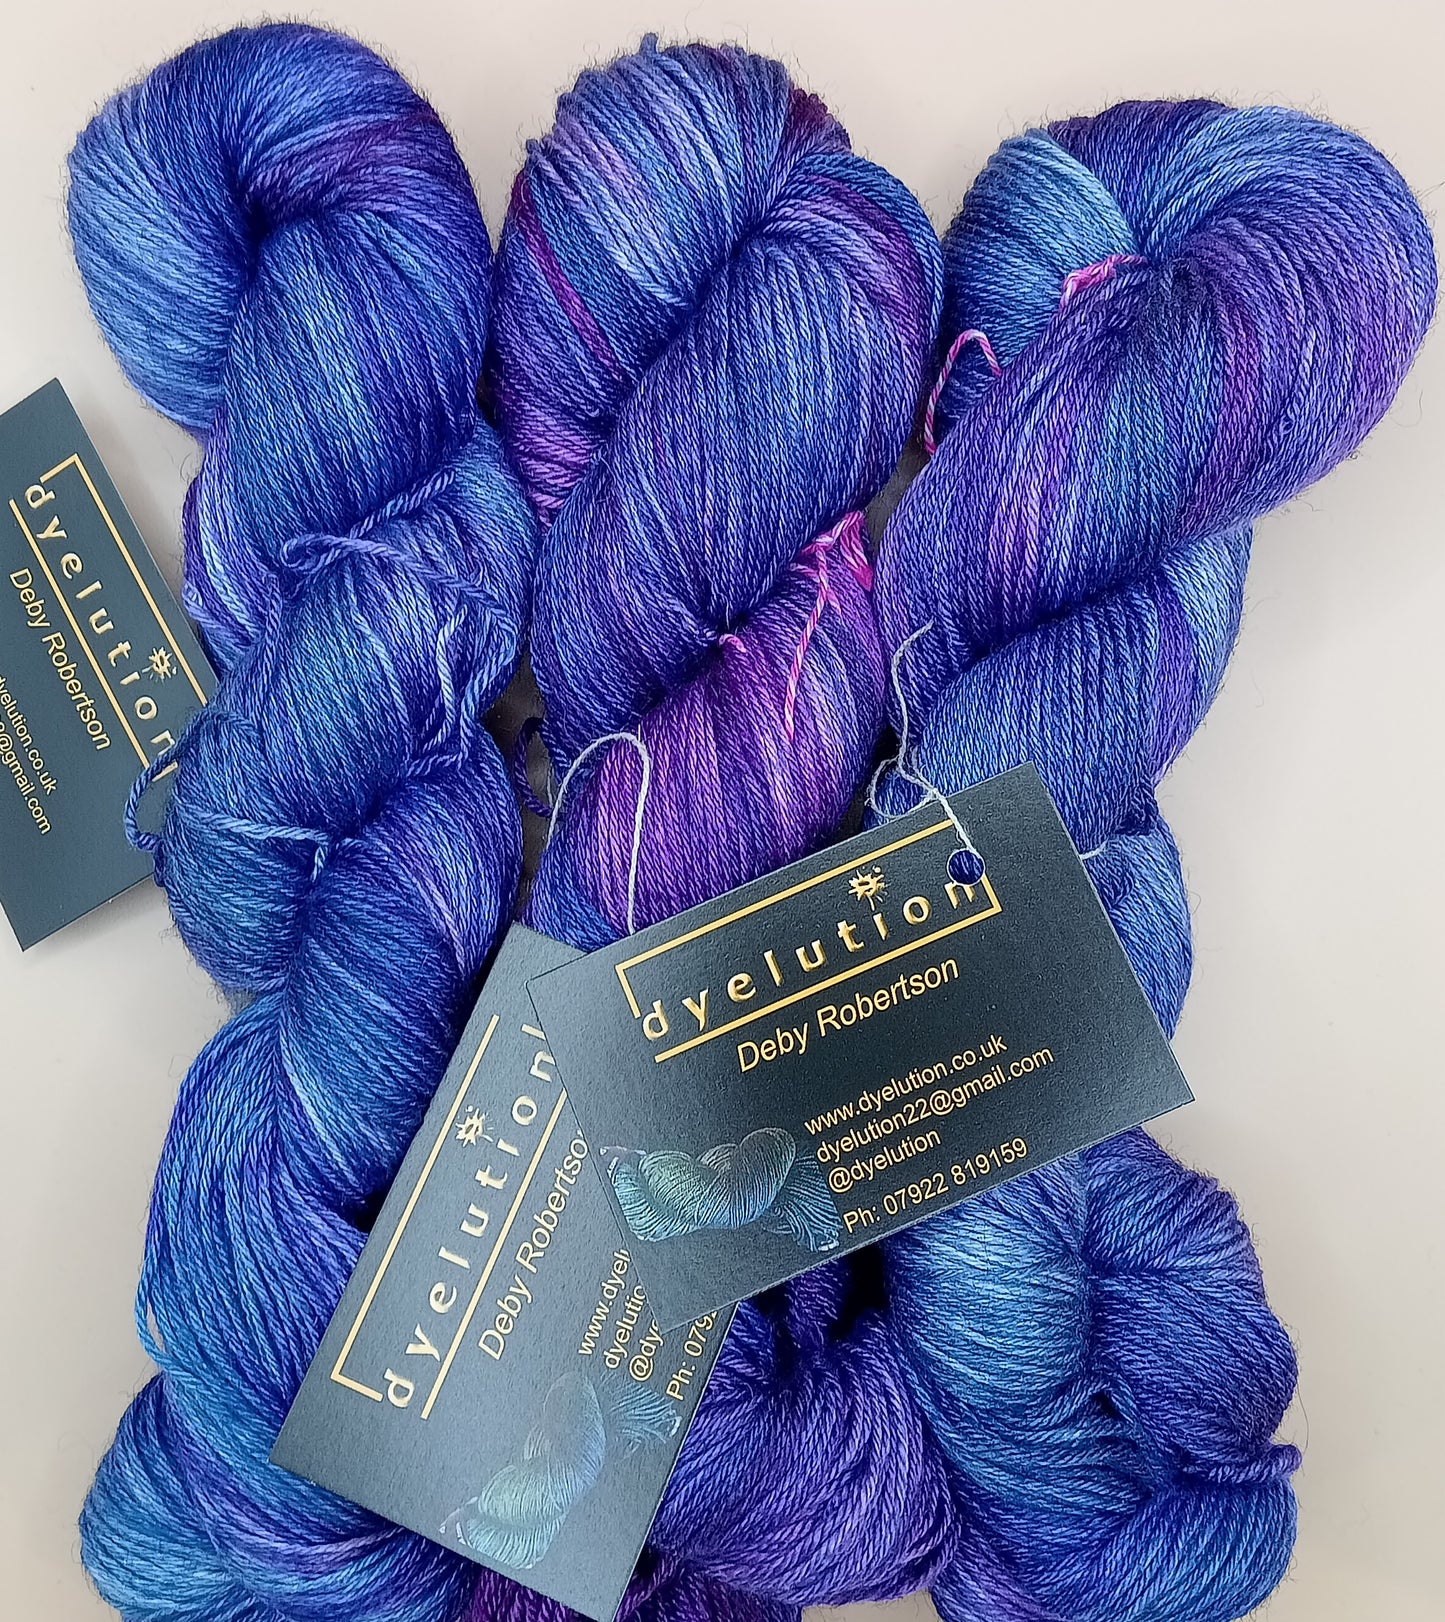 100G Bluefaced Leicester and silk hand dyed 4 ply Yarn- "Pandora"